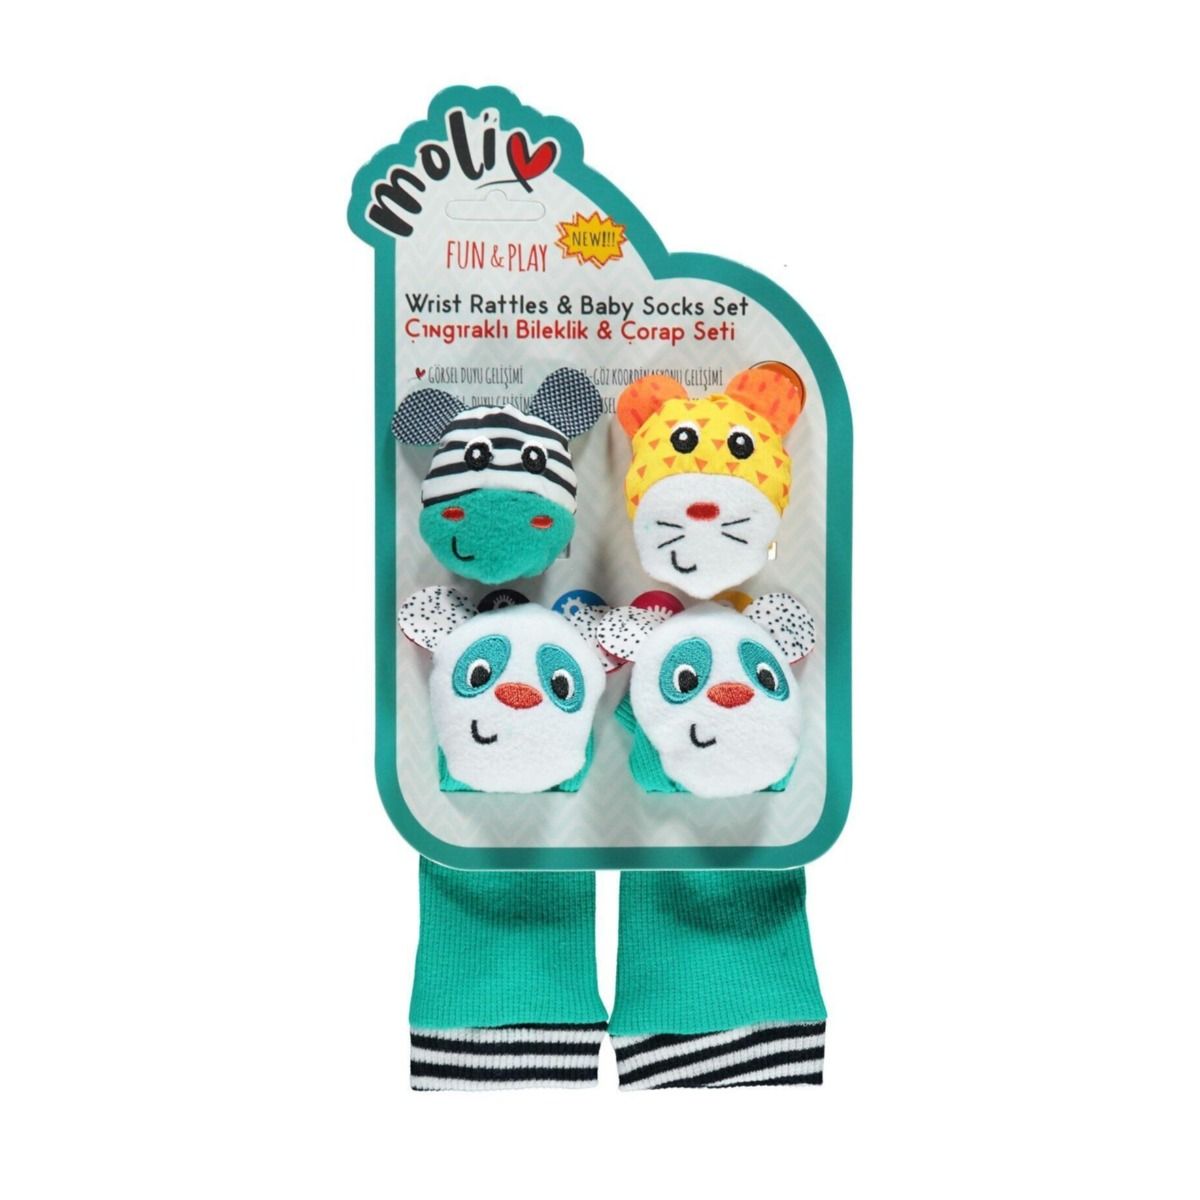 Moli - My First Rattle And Baby Socks Set